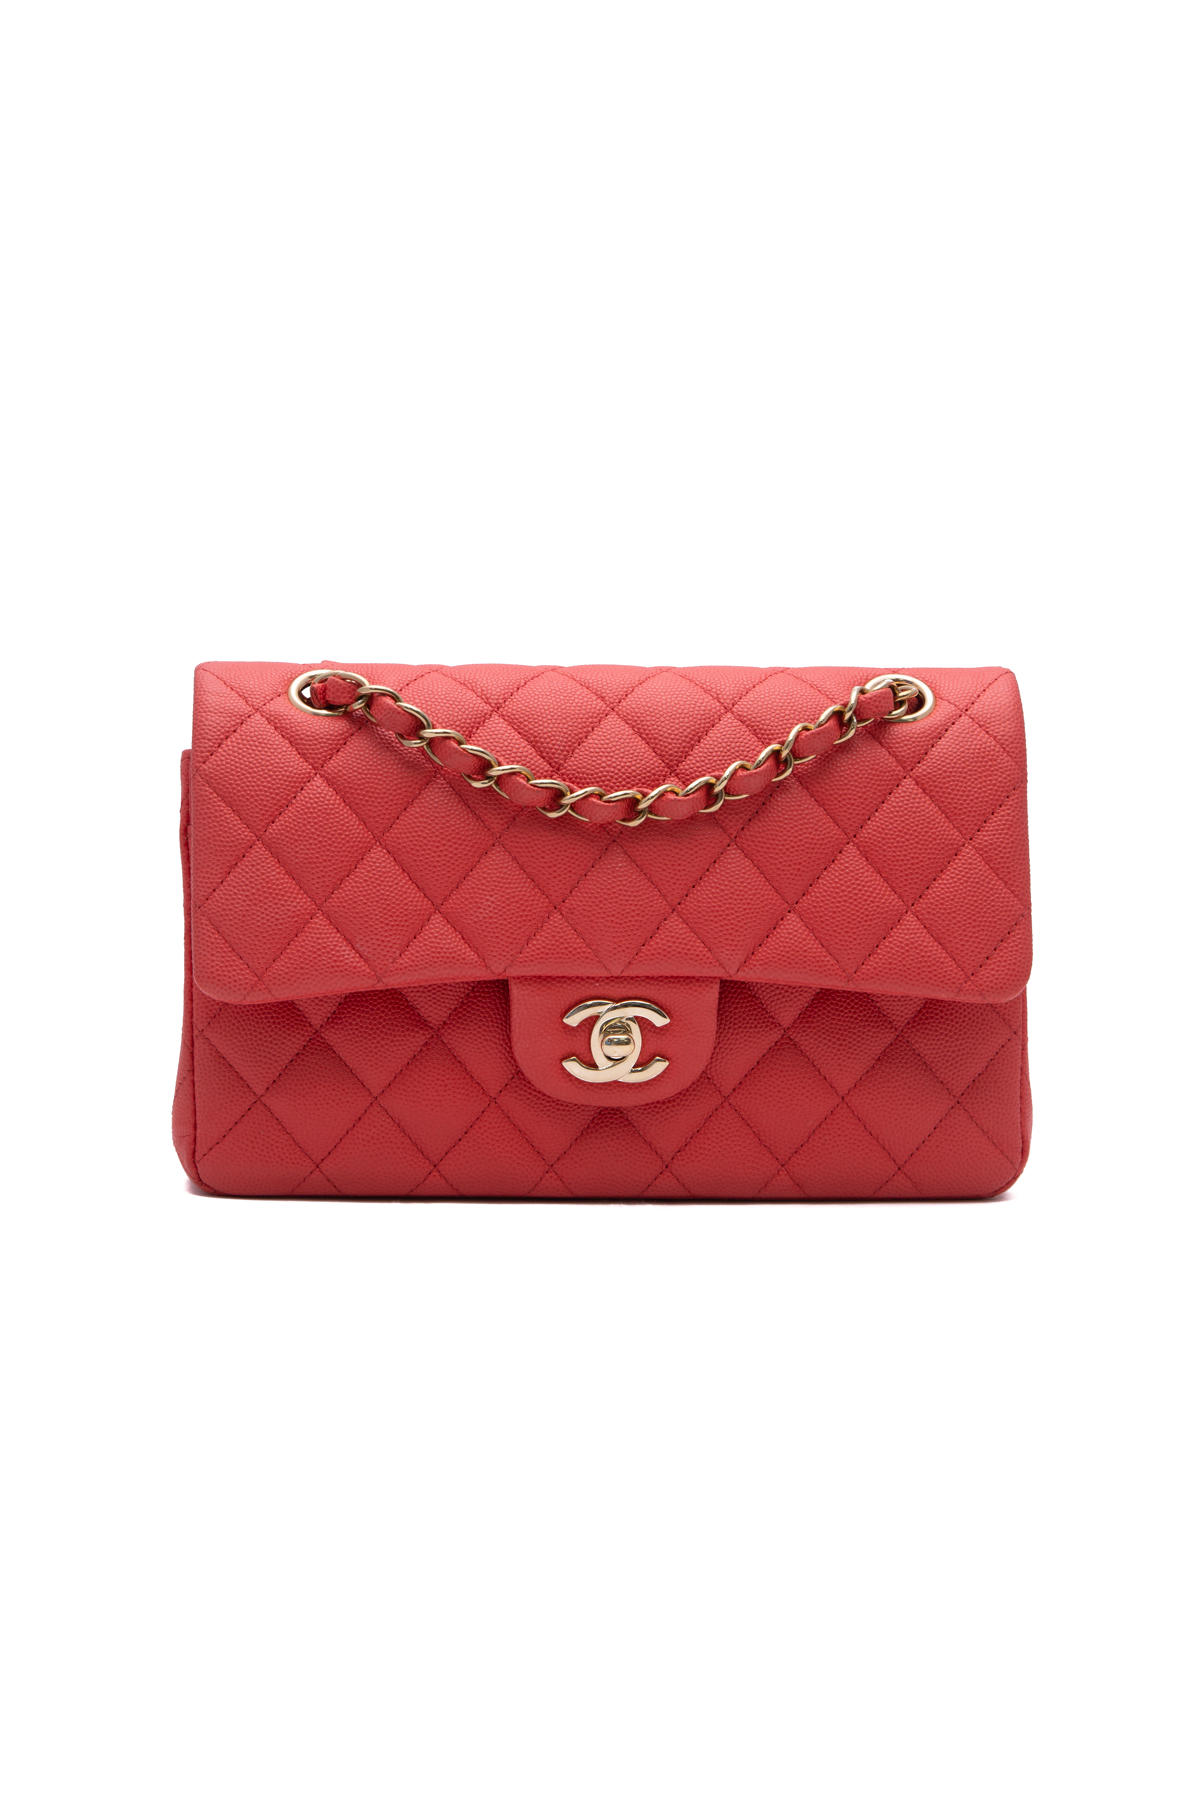 chanel double flap caviar small